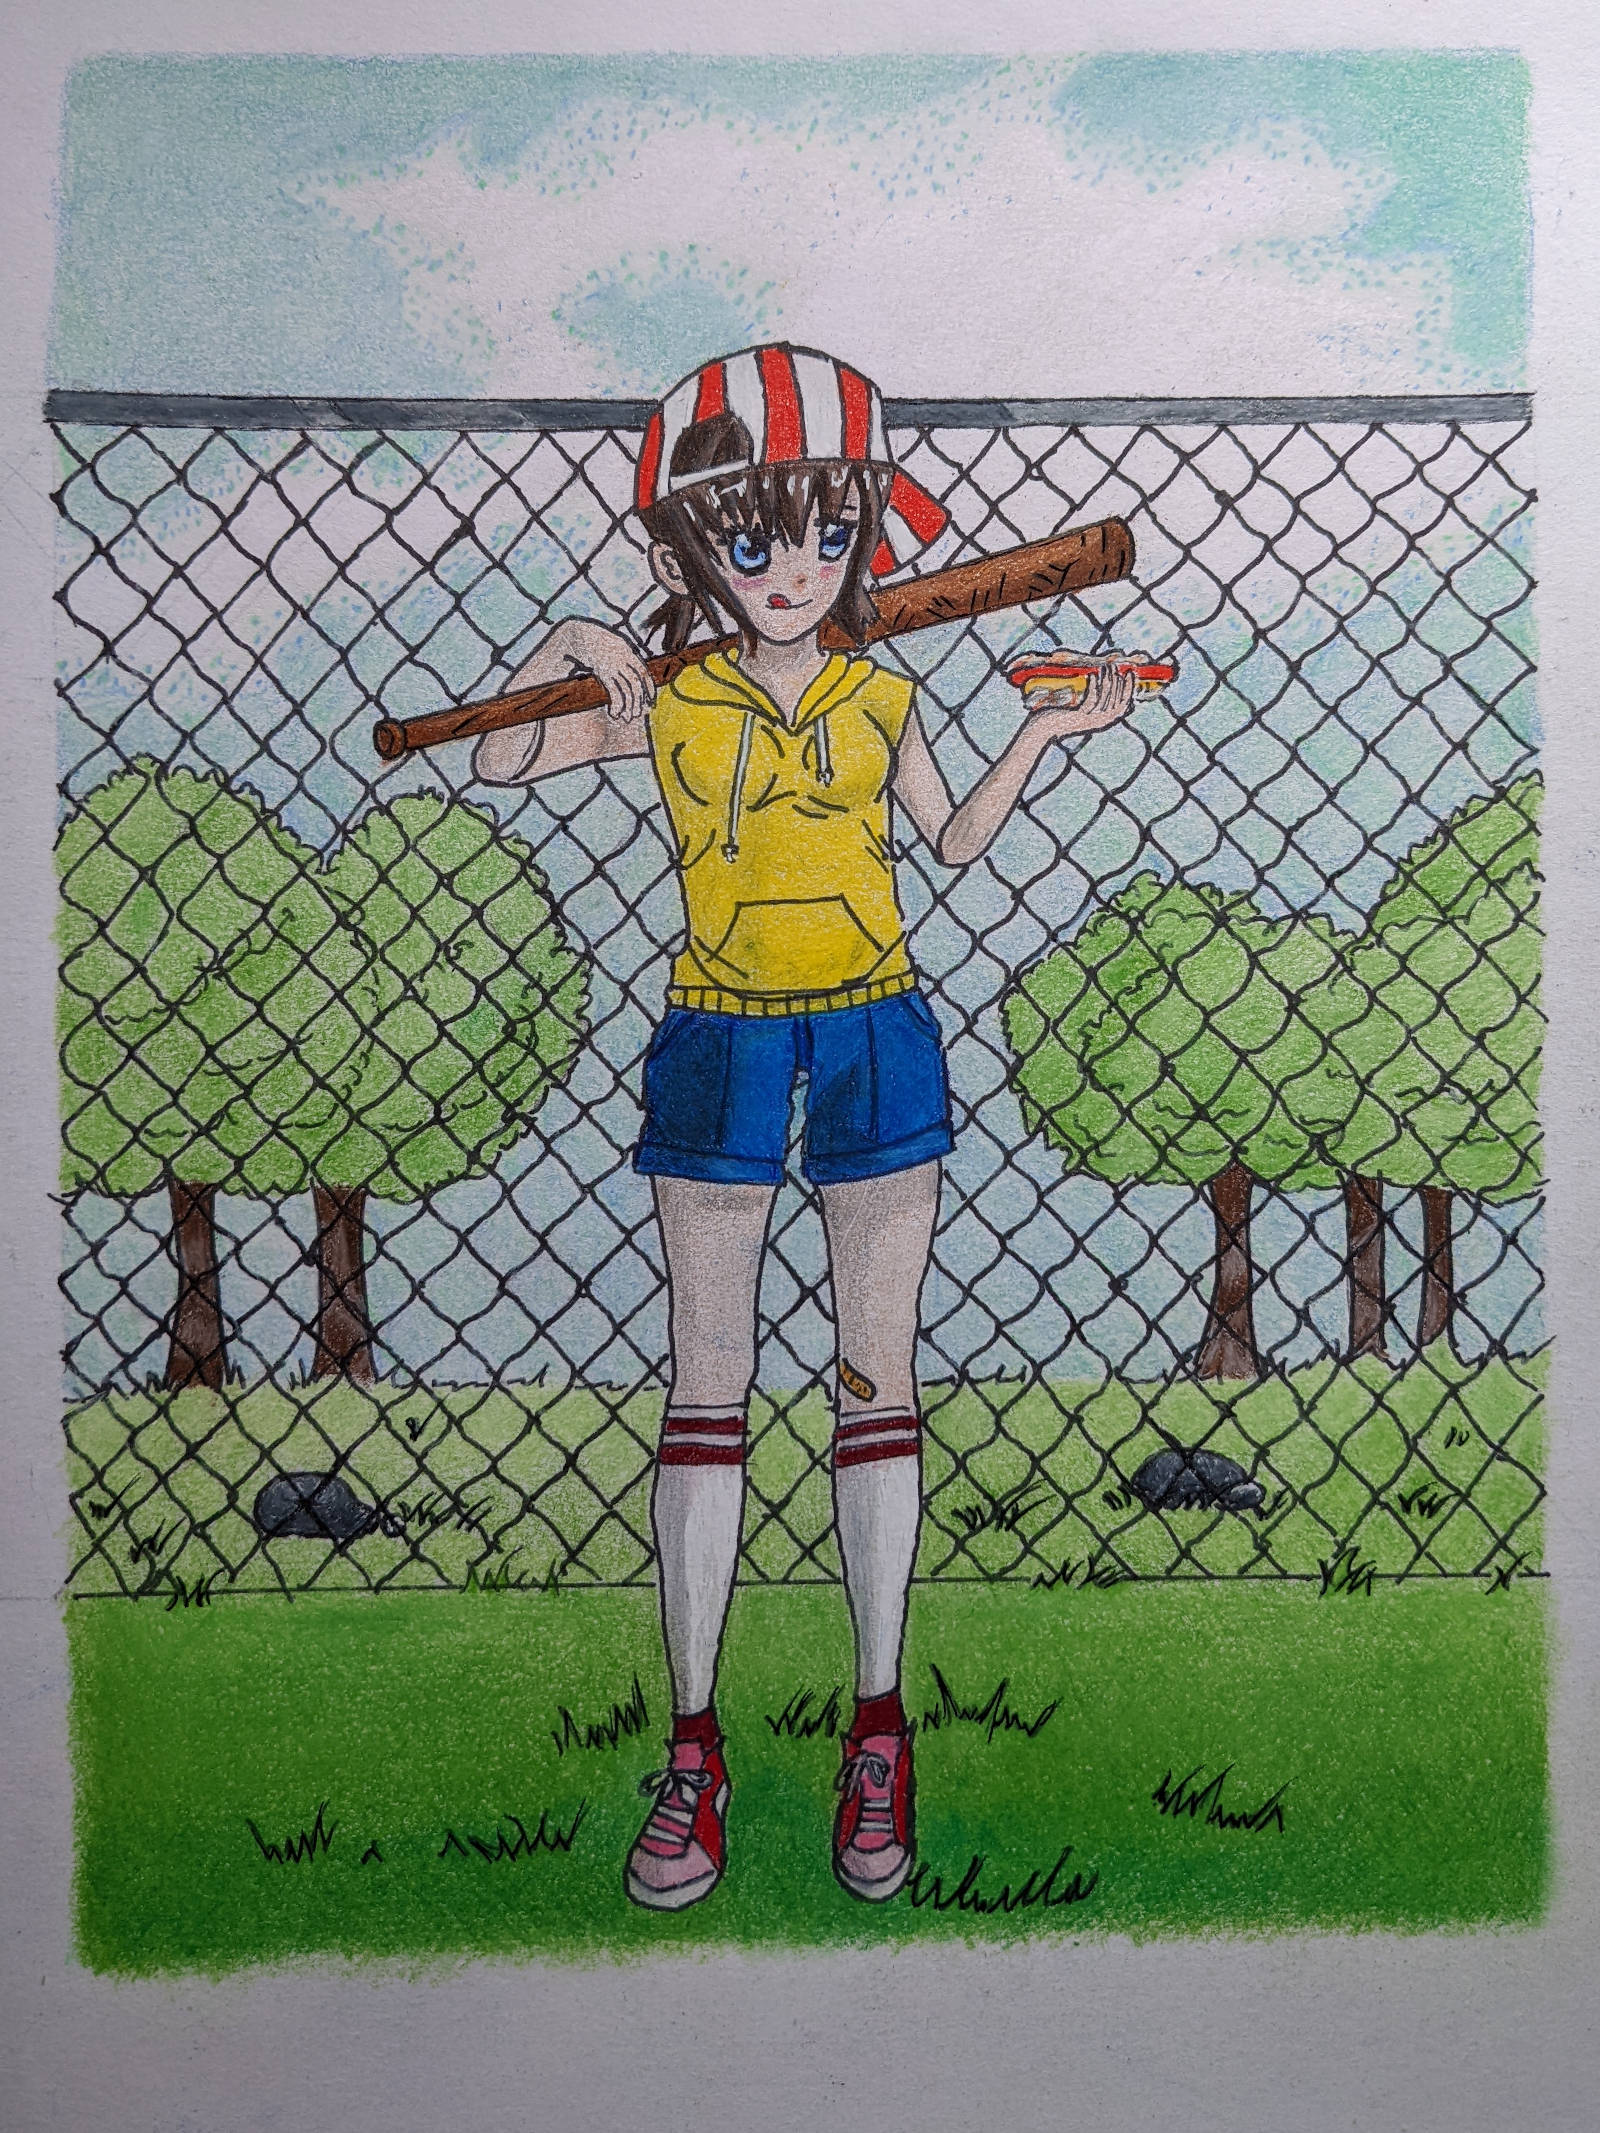 Girl holding a softball bat over her shoulder. In her left hand, holding a hotdog. She is standing in front of a chain-linked fence with trees in the background. Fully colored.